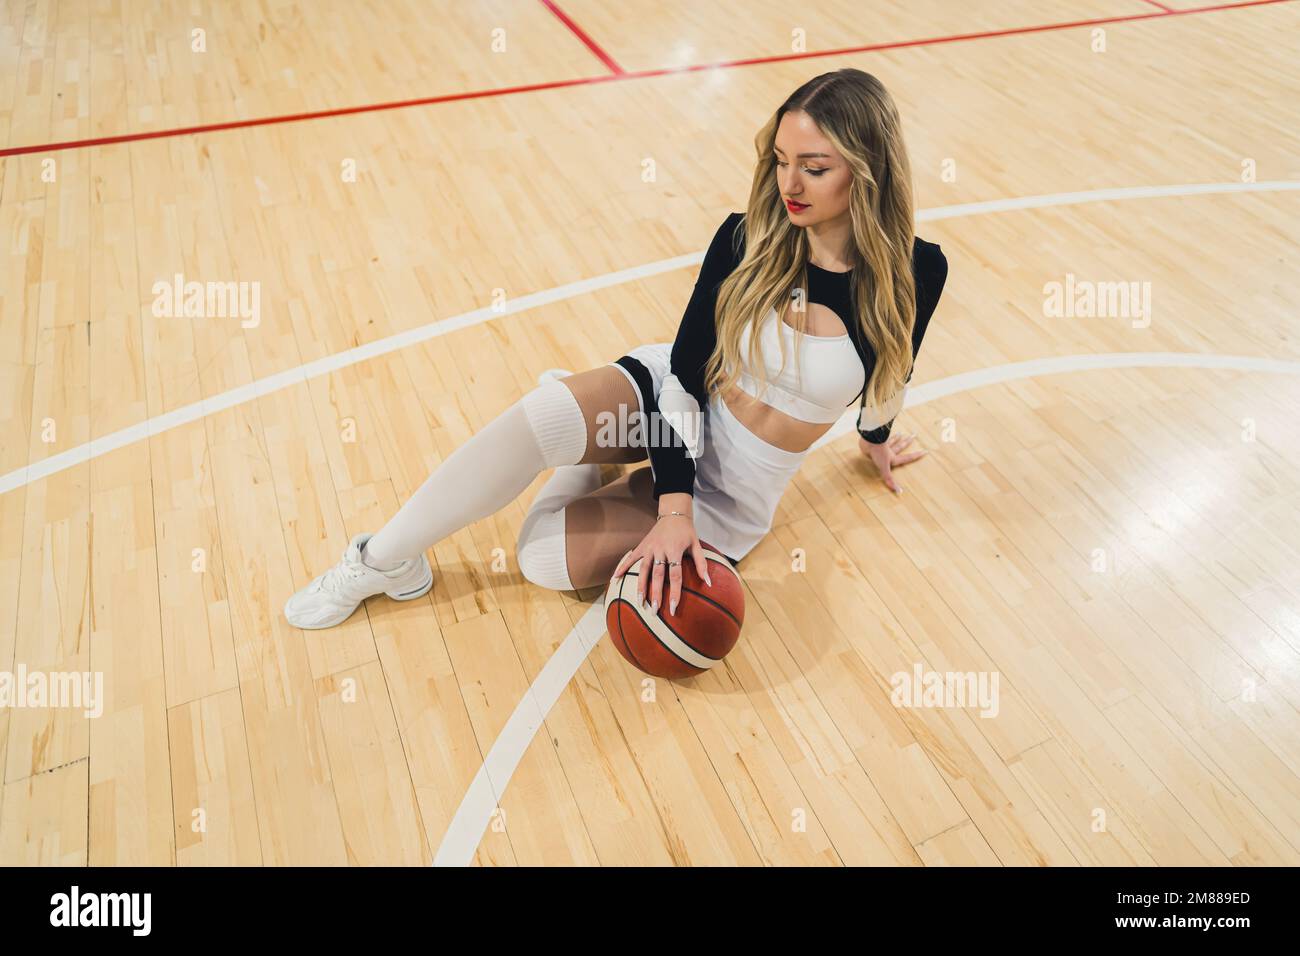 An attractive cheerleader with blond hair sitting confidently on the arena floor with a basketball. Dressed in a mini-skirt and knee-high socks. Showing sports spirit. Stock Photo